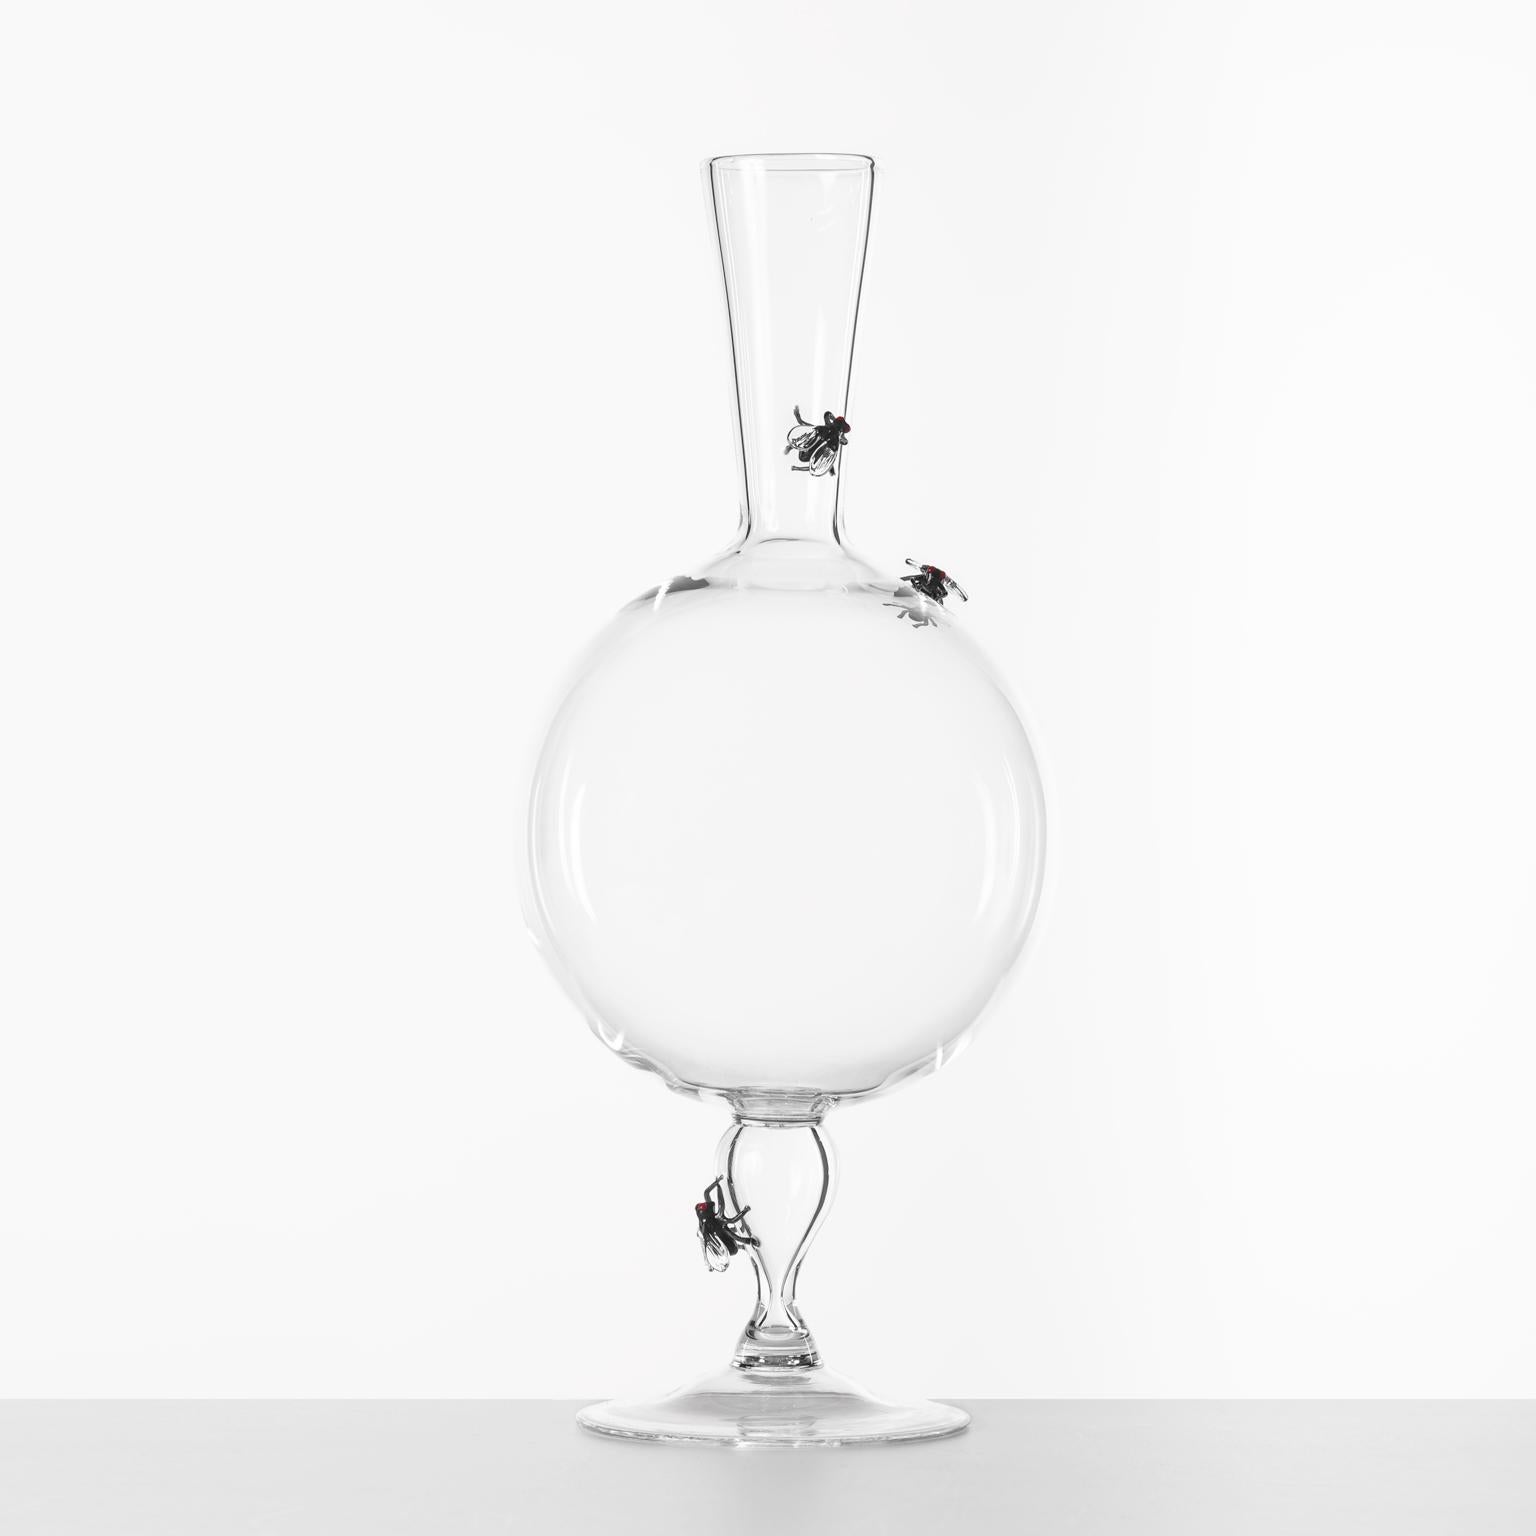 'Vanitas Decanter' Hand Blown Glass Decanter by Simone Crestani

Vanitas Decanter is one of the pieces from the Vanitas Collection.

